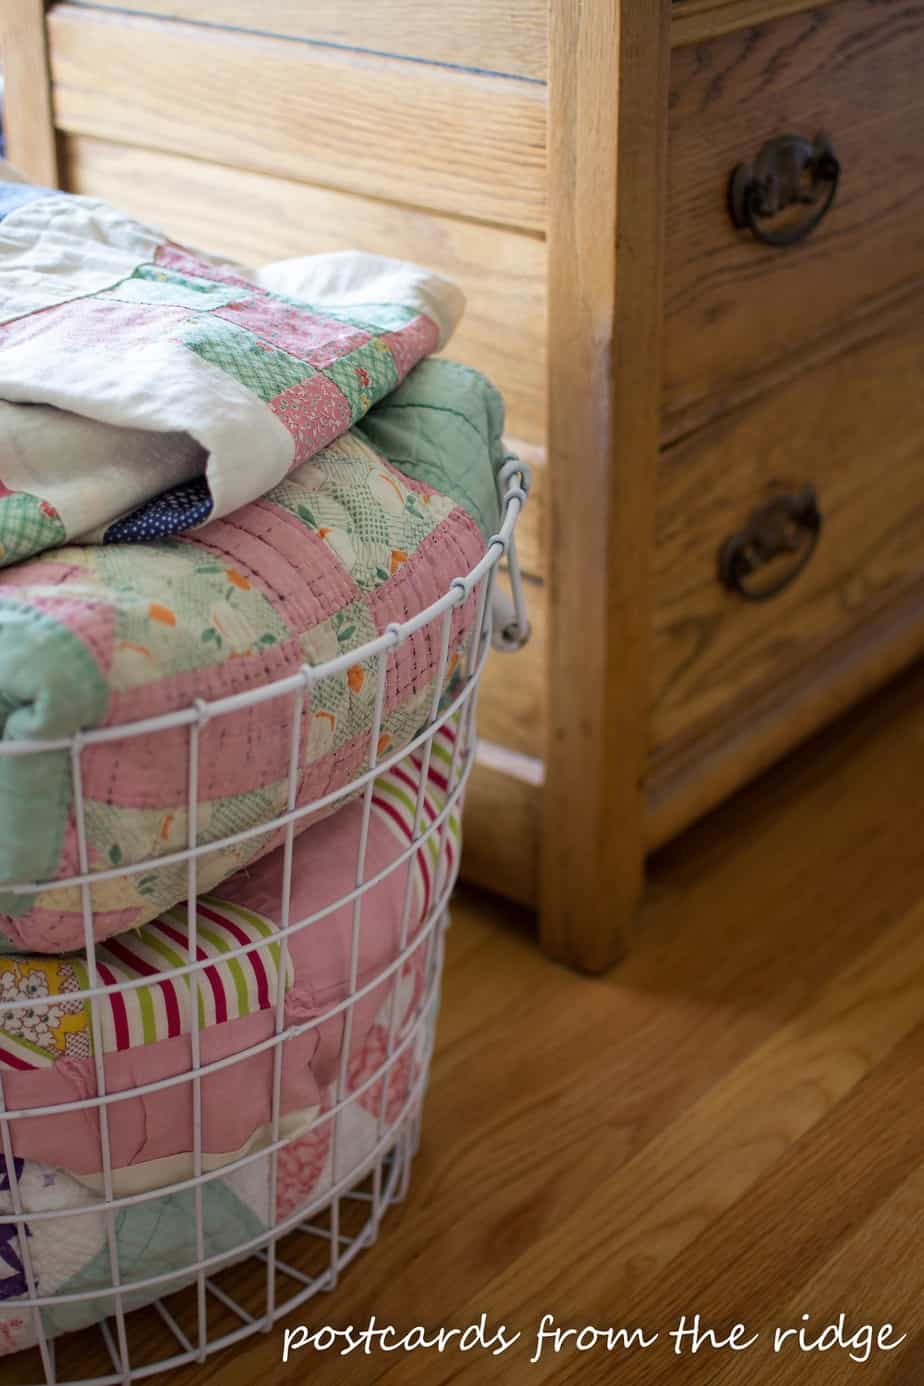 Pretty vintage quilts in a basket. So many great decorating ideas here. Postcards from the Ridge